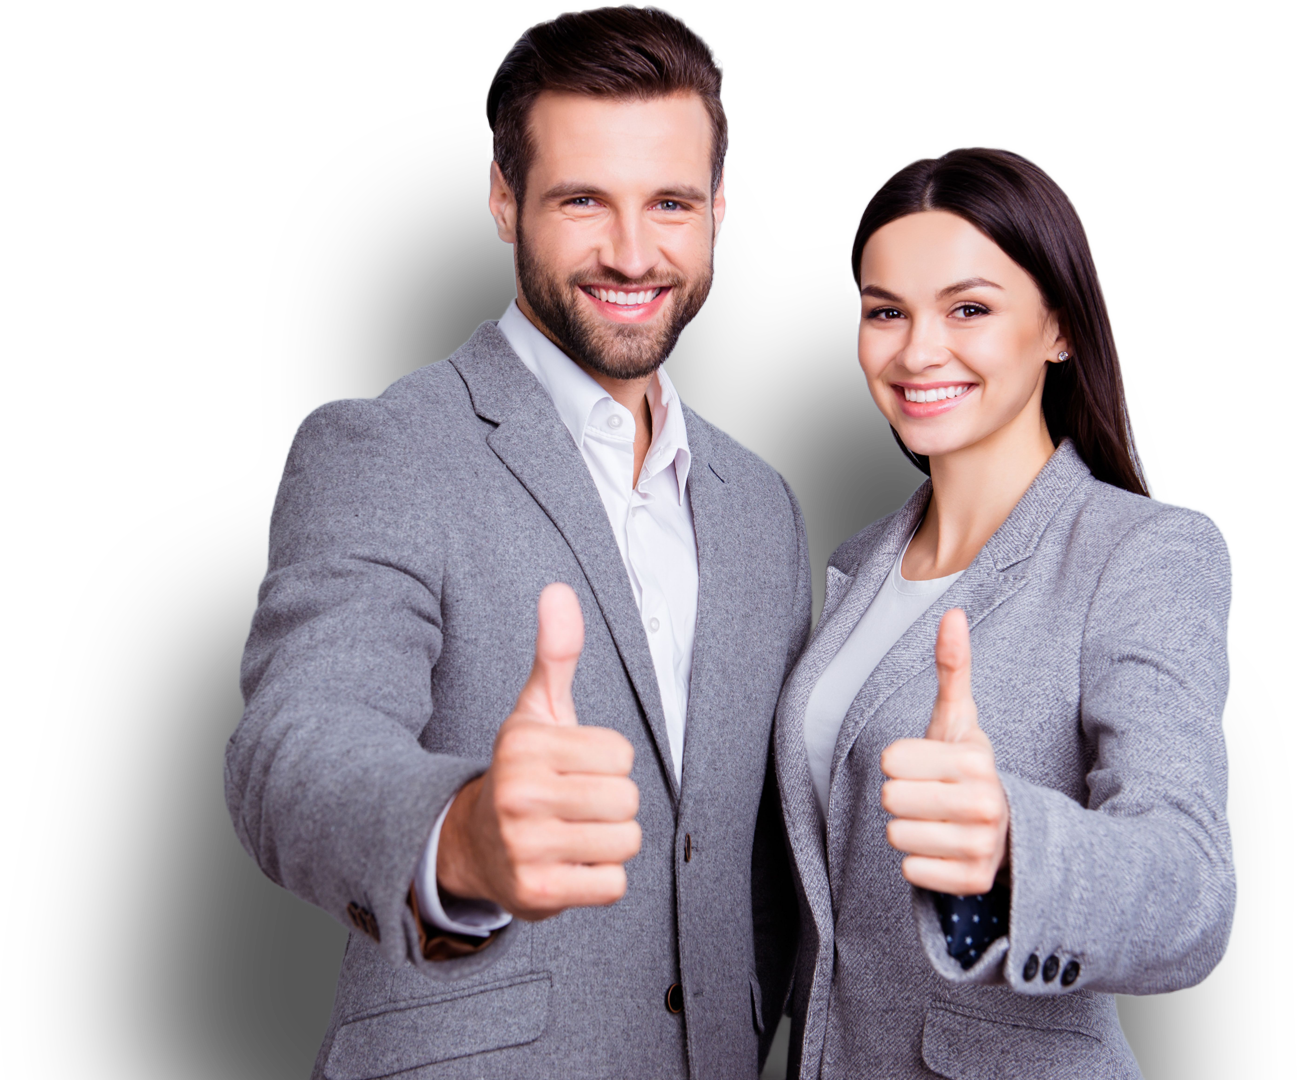 business people showing thumbs up a